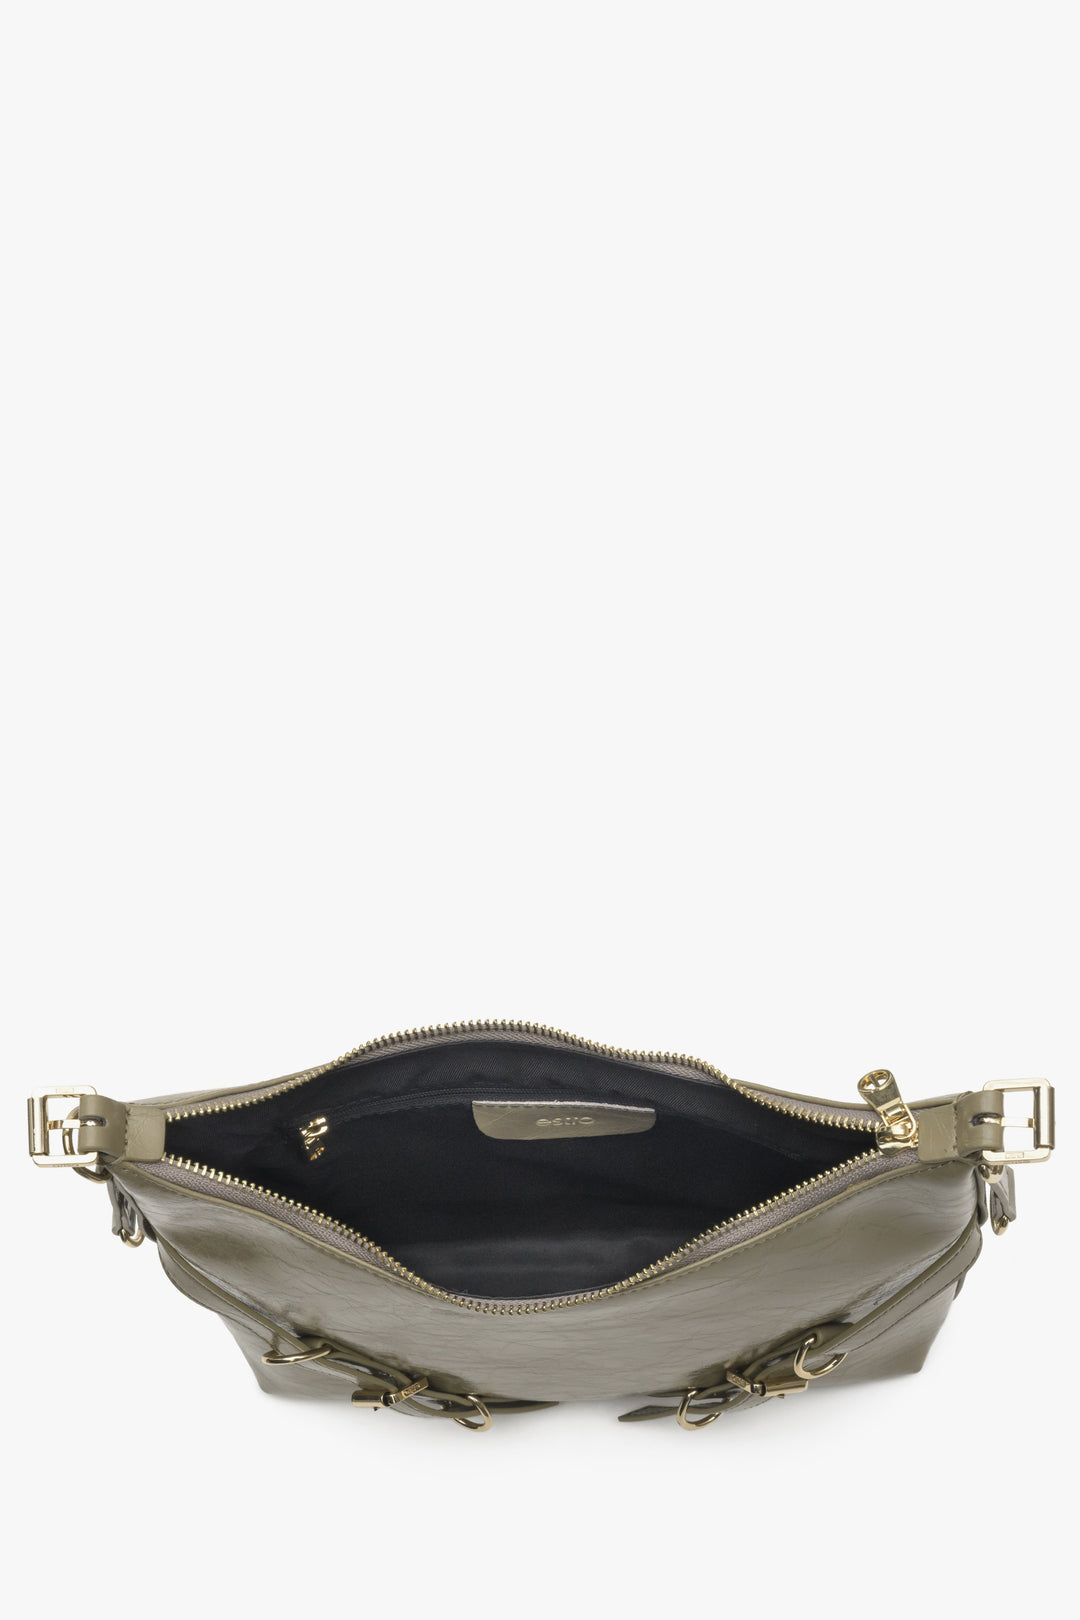 Women's olive Estro shoulder bag made of patent leather - close-up on the interior of the model.